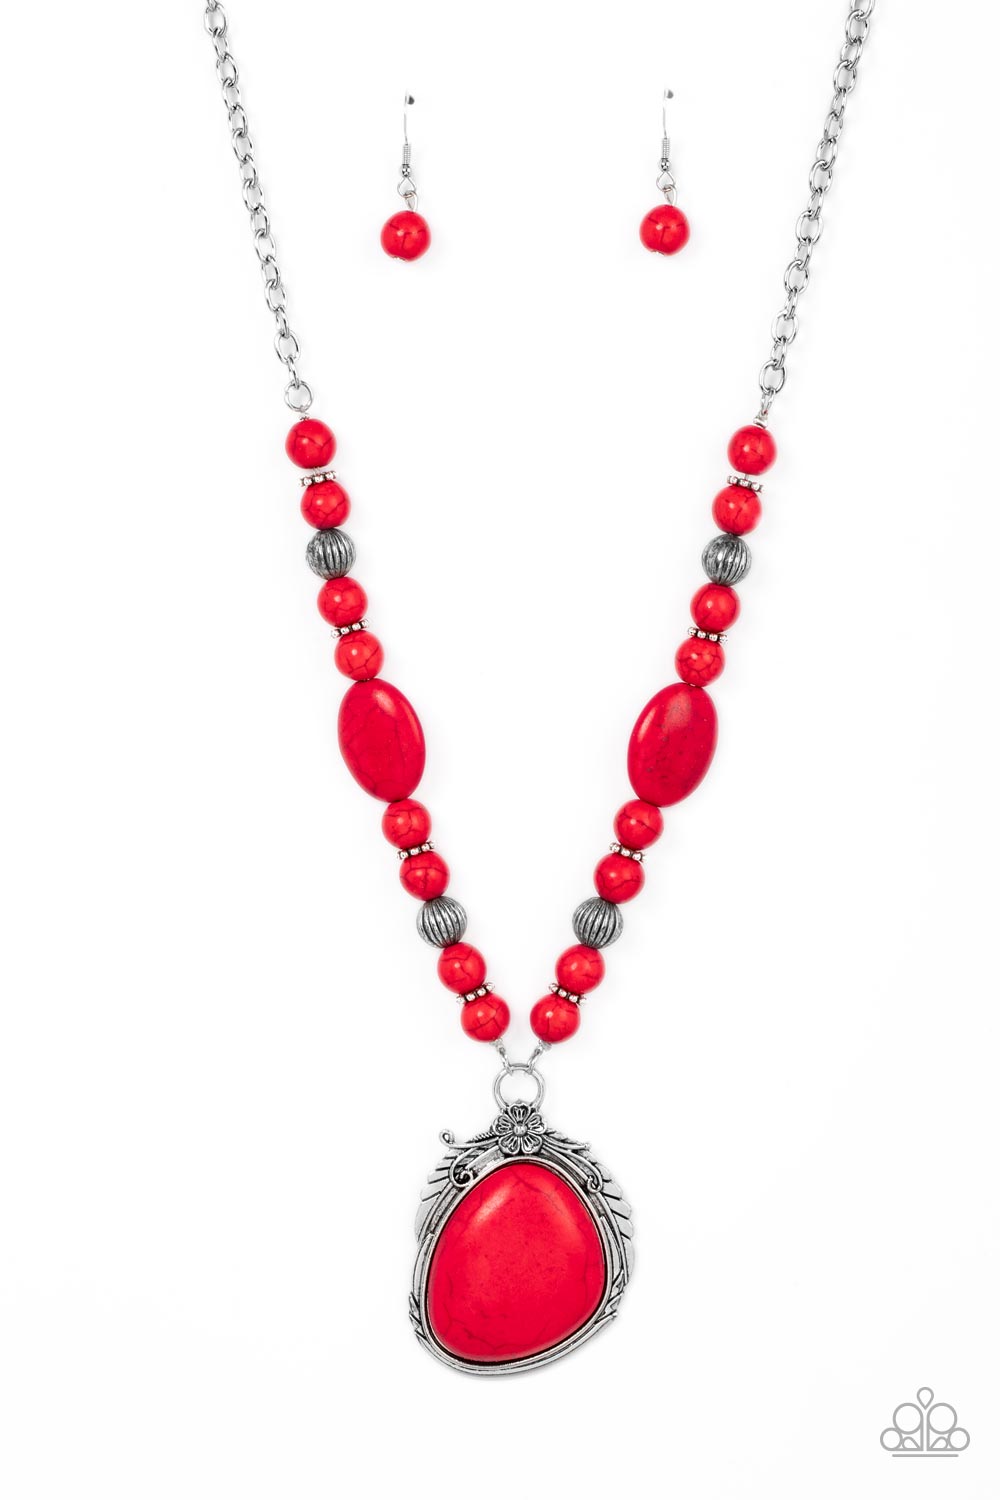 Southwest Paradise - Red Stone and Bead Necklace - Paparazzi Accessories